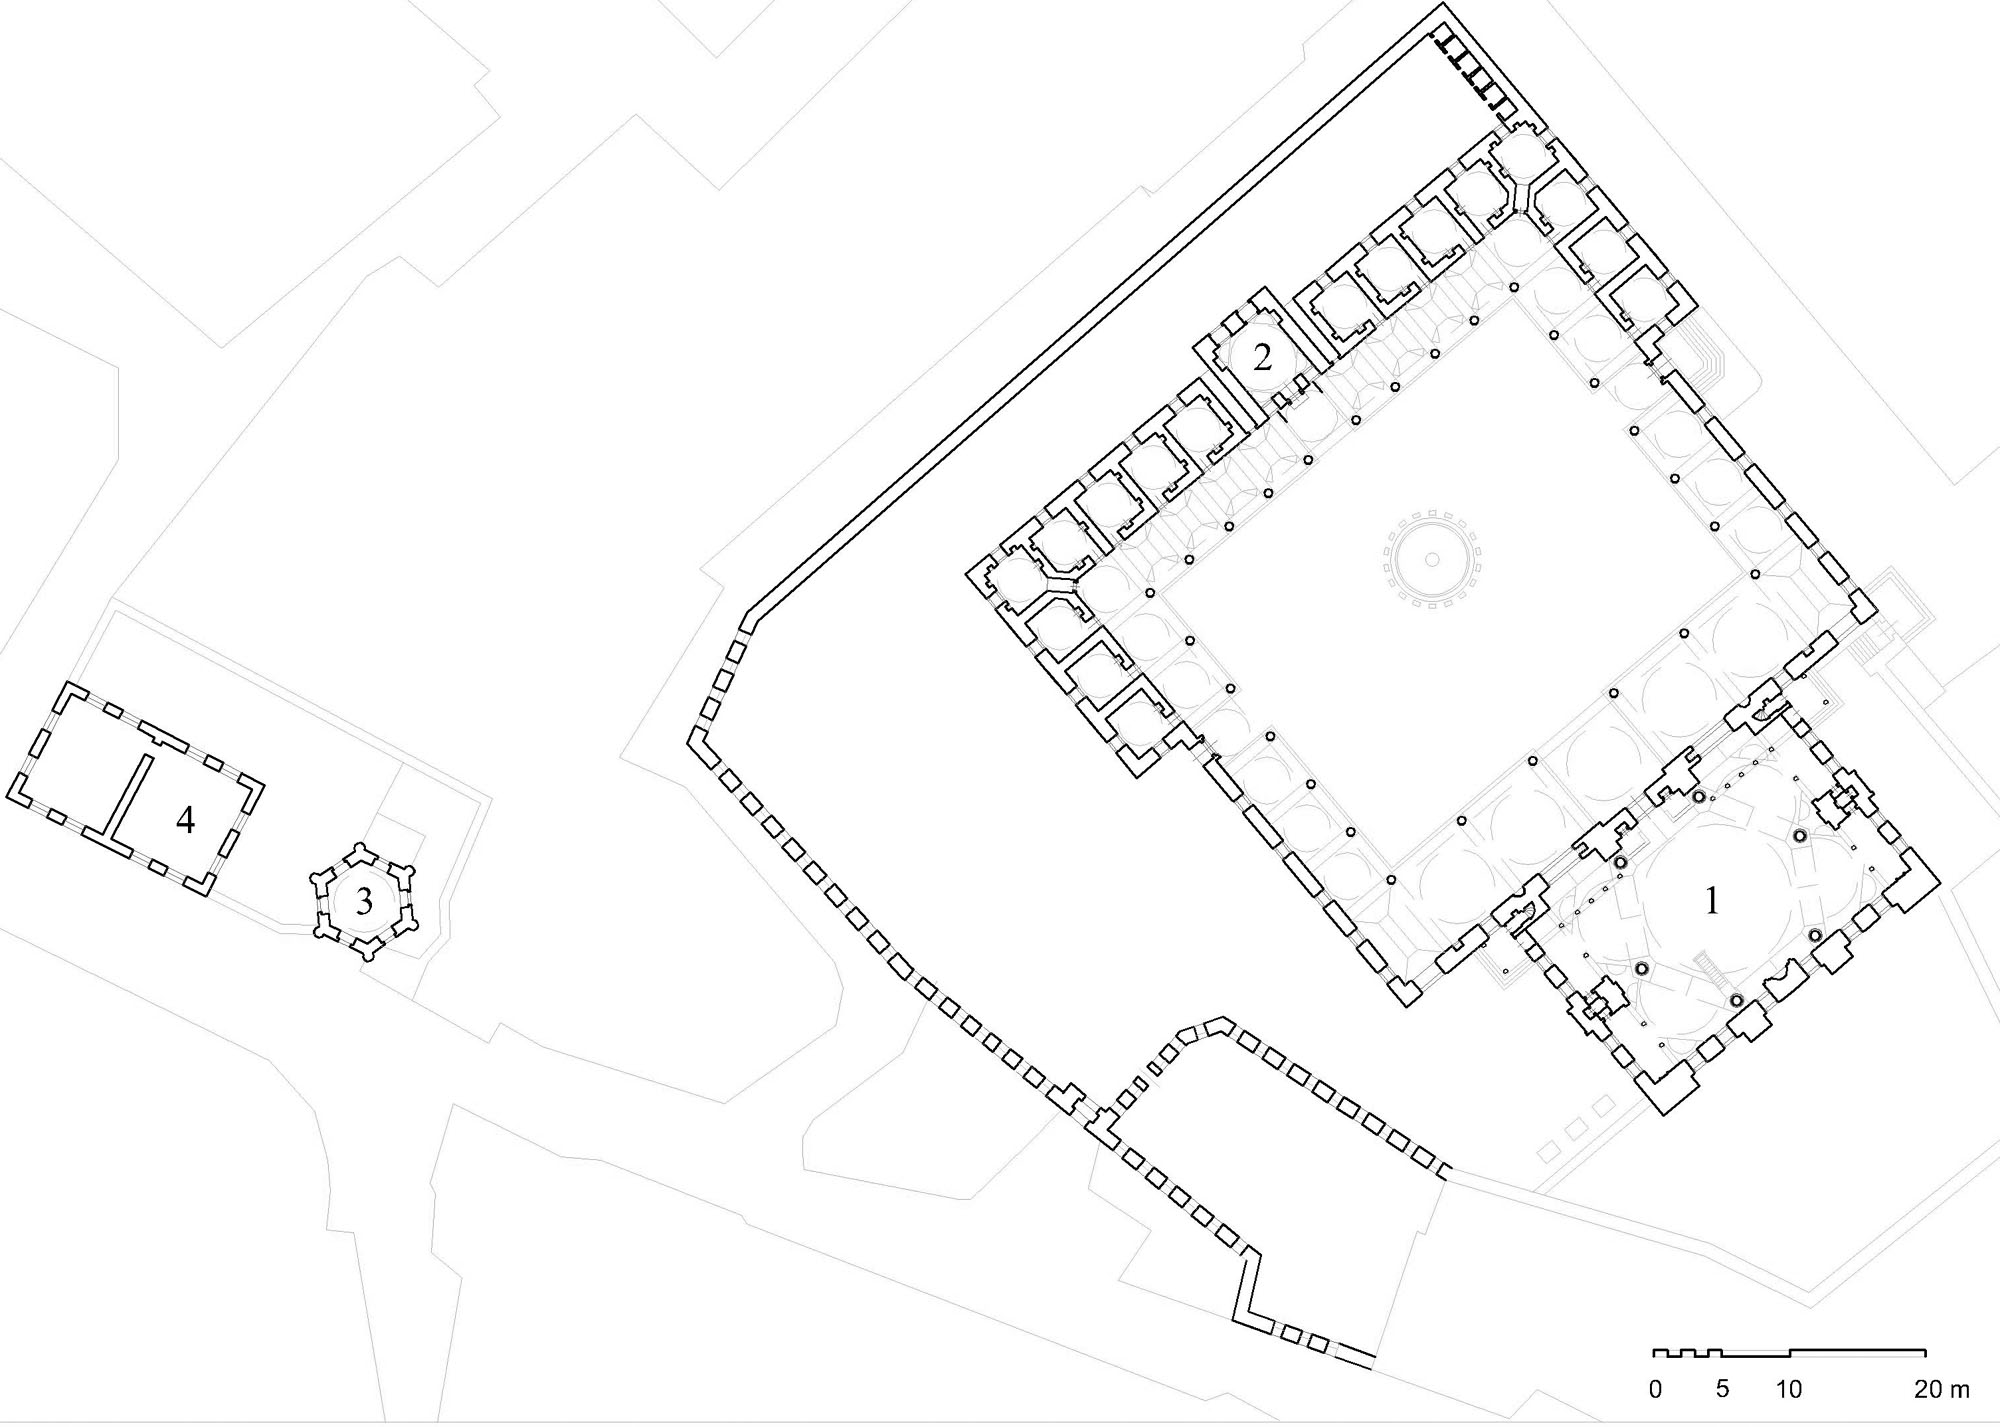 Kara Ahmed Paşa Külliyesi - Floor plan of complex showing (1) mosque, (2) madrasa, (3) mausoleum, (4) elementary school. DWG file in AutoCAD 2000 format. Click the download button to download a zipped file containing the .dwg file.